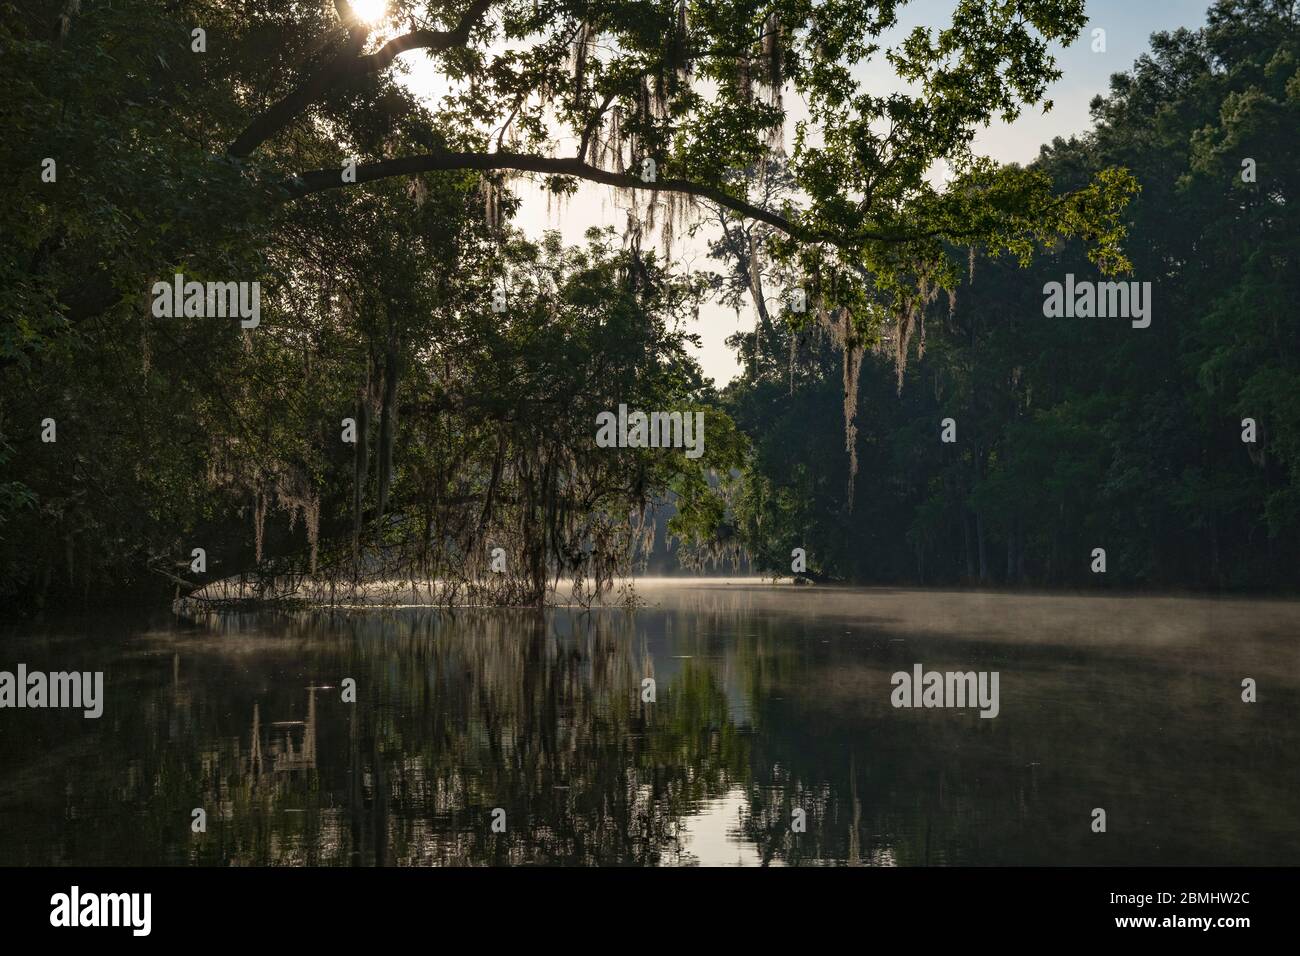 Morning light on the scenic Withlacoochee River. A long windy Florida waterway. Mist rises off the water into the trees draped in Spanish moss. North Stock Photo